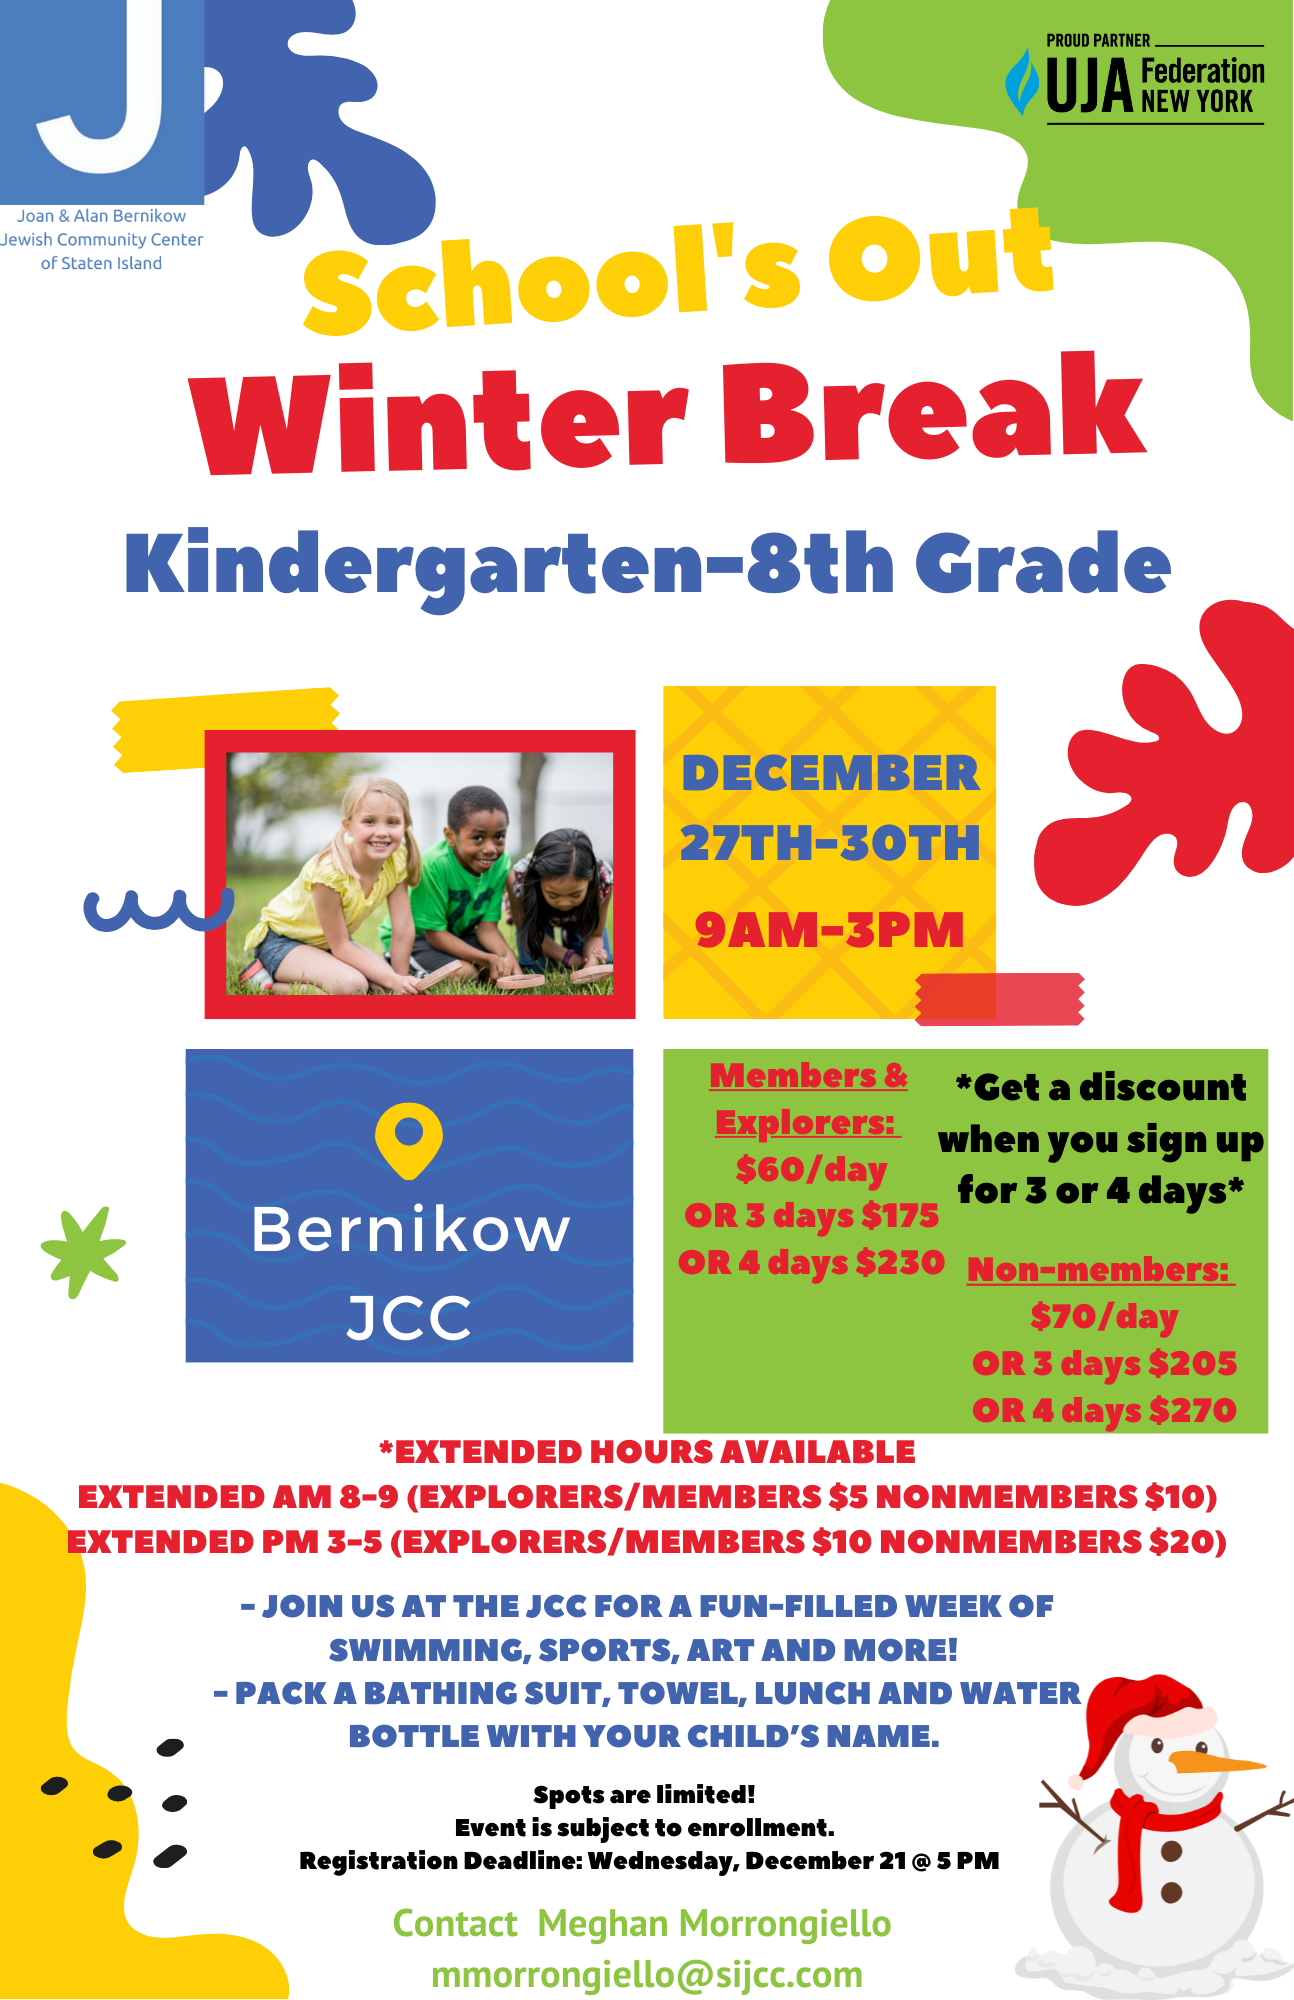 School may be closed, but the J is OPEN! Register for School's Out Winter Break here: https://bit.ly/3abjtse